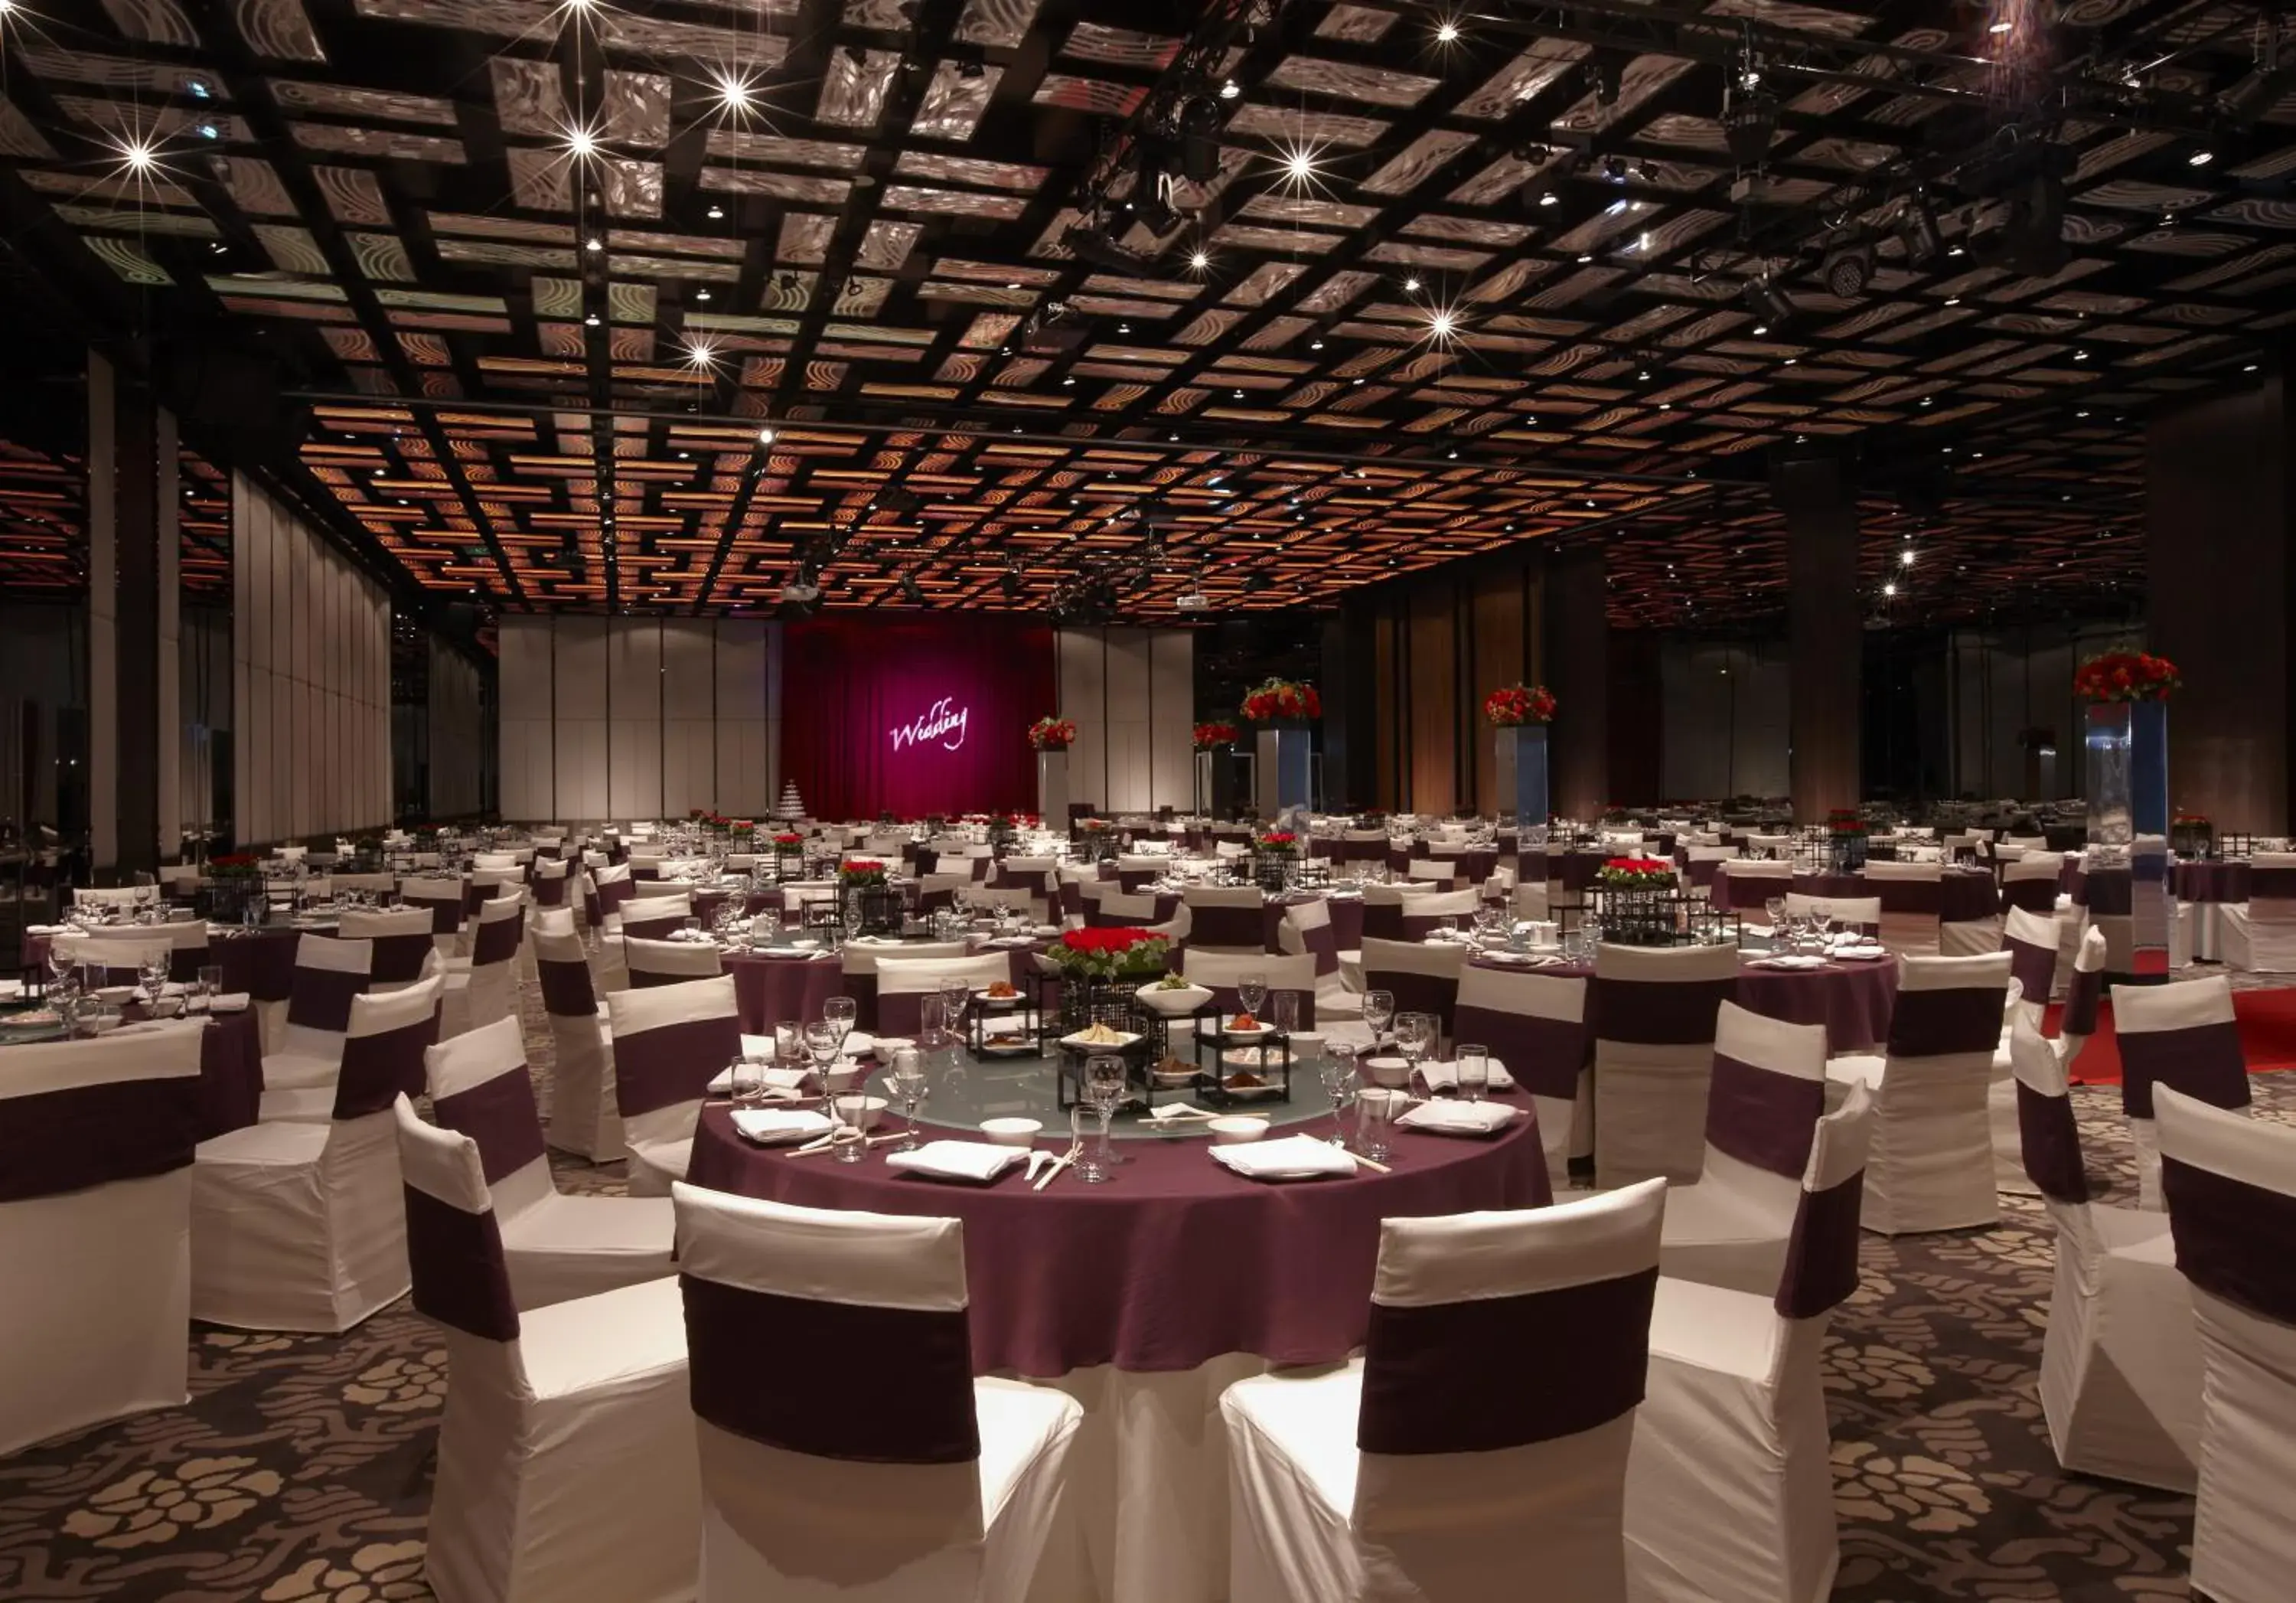 Meeting/conference room, Banquet Facilities in Silks Place Tainan